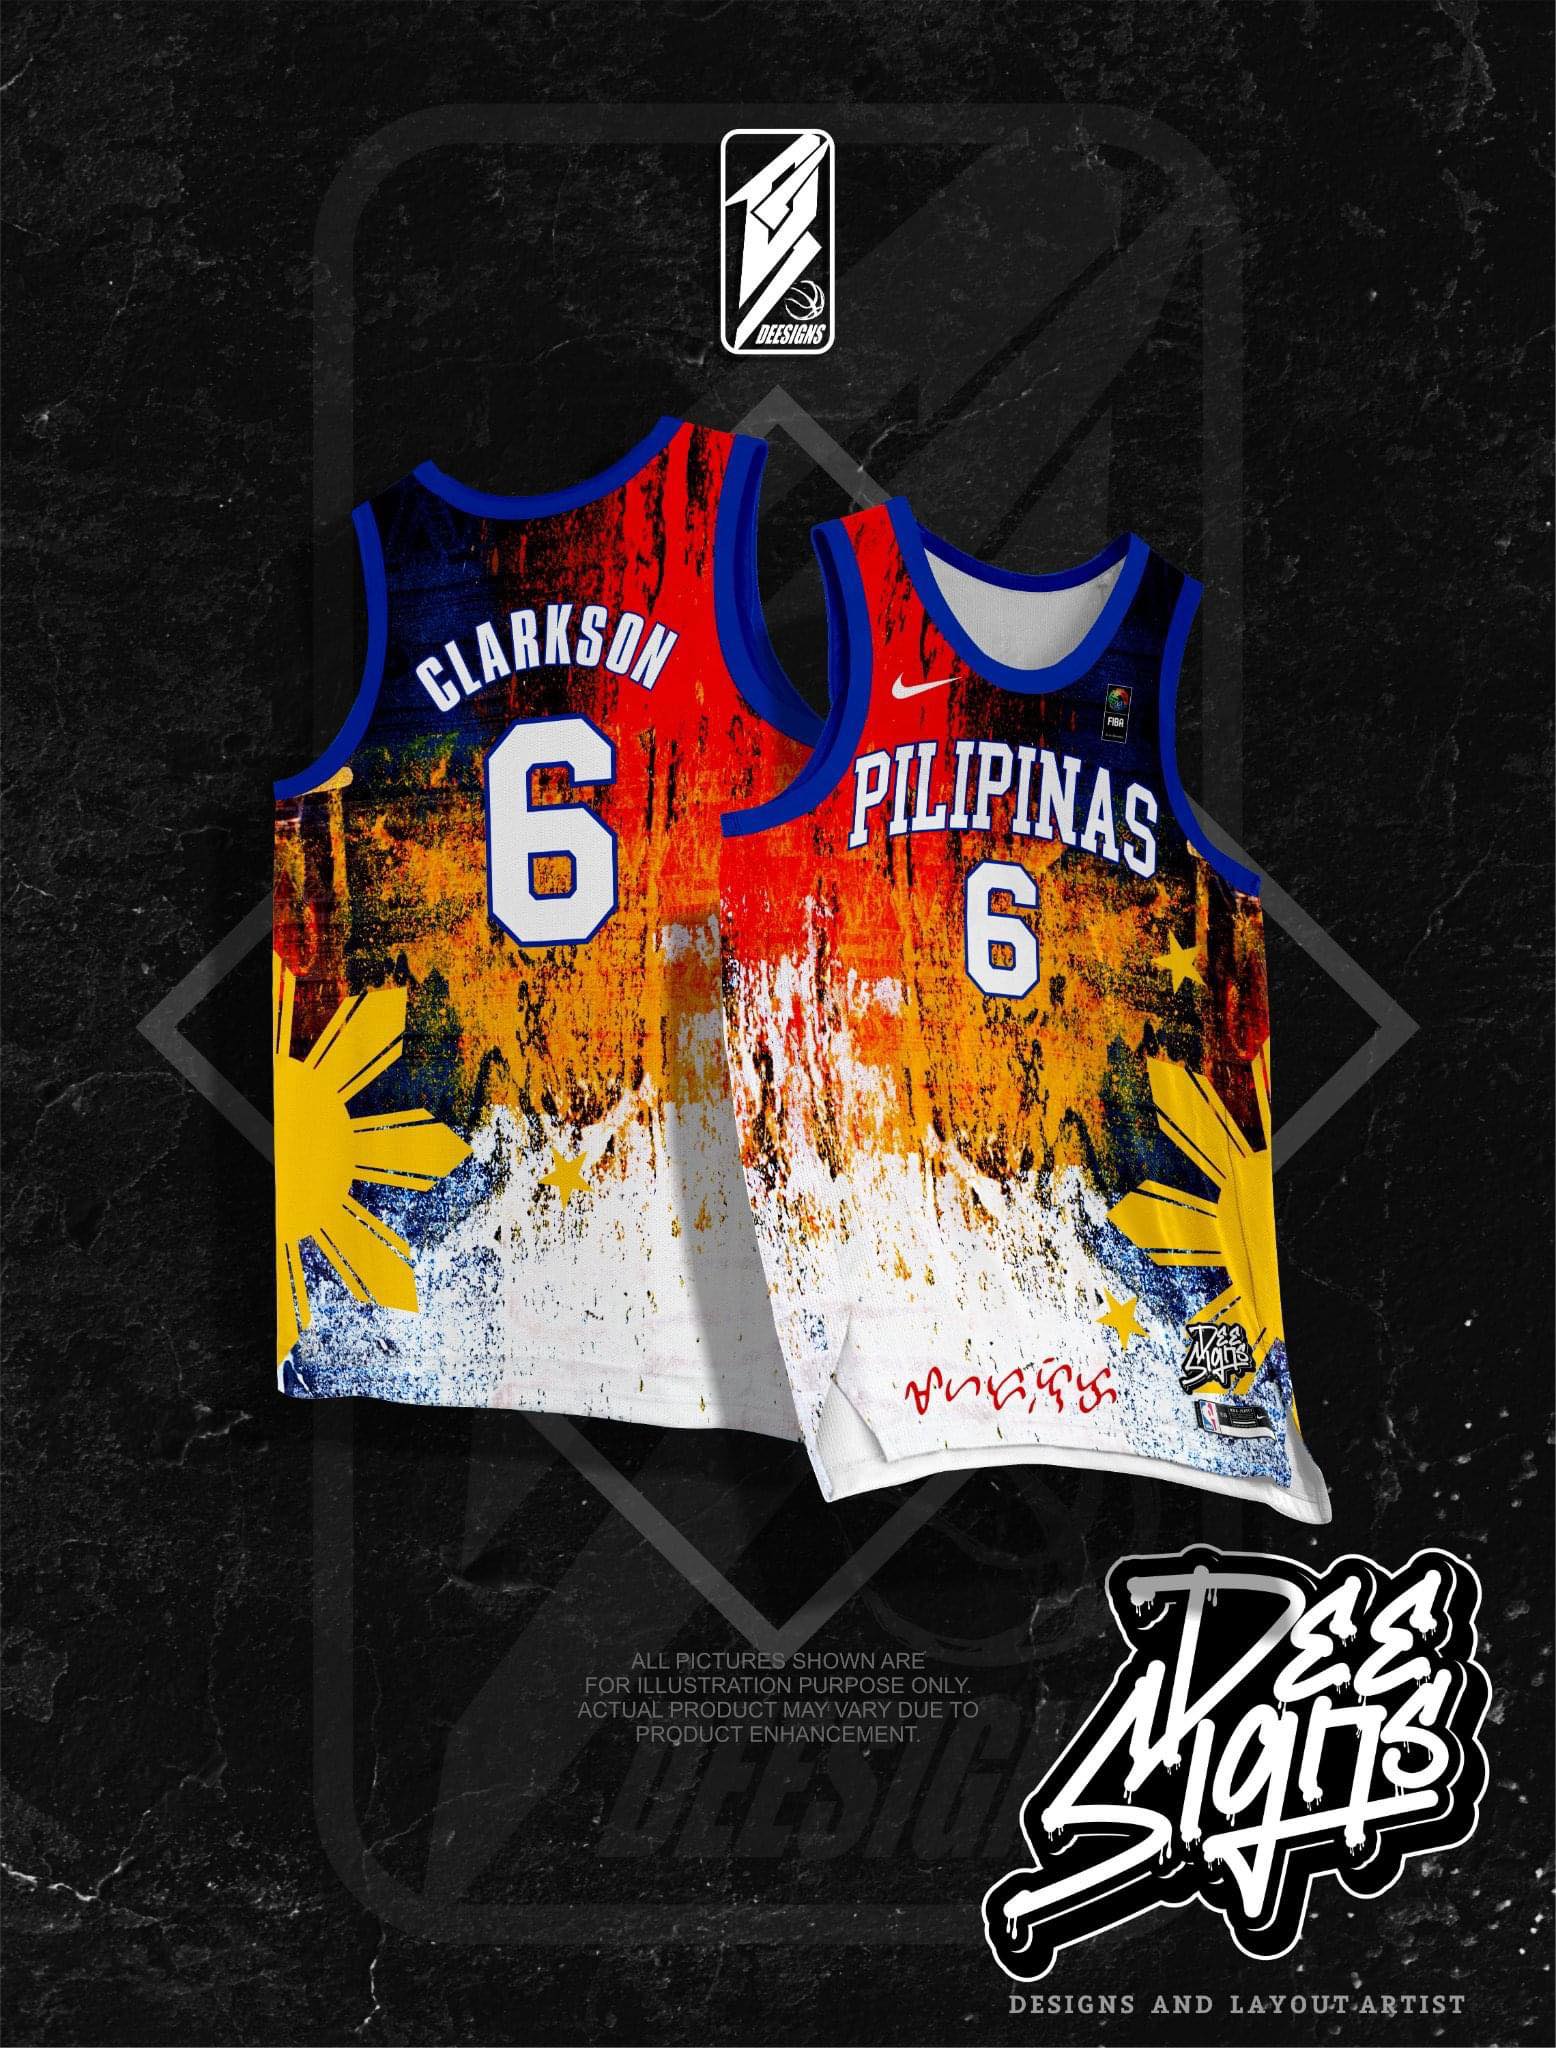 BASKETBALL PILIPINAS JERSEY FREE CUSTOMIZE OF NAME AND NUMBER ONLY full  sublimation high quality fabrics/ trending jersey